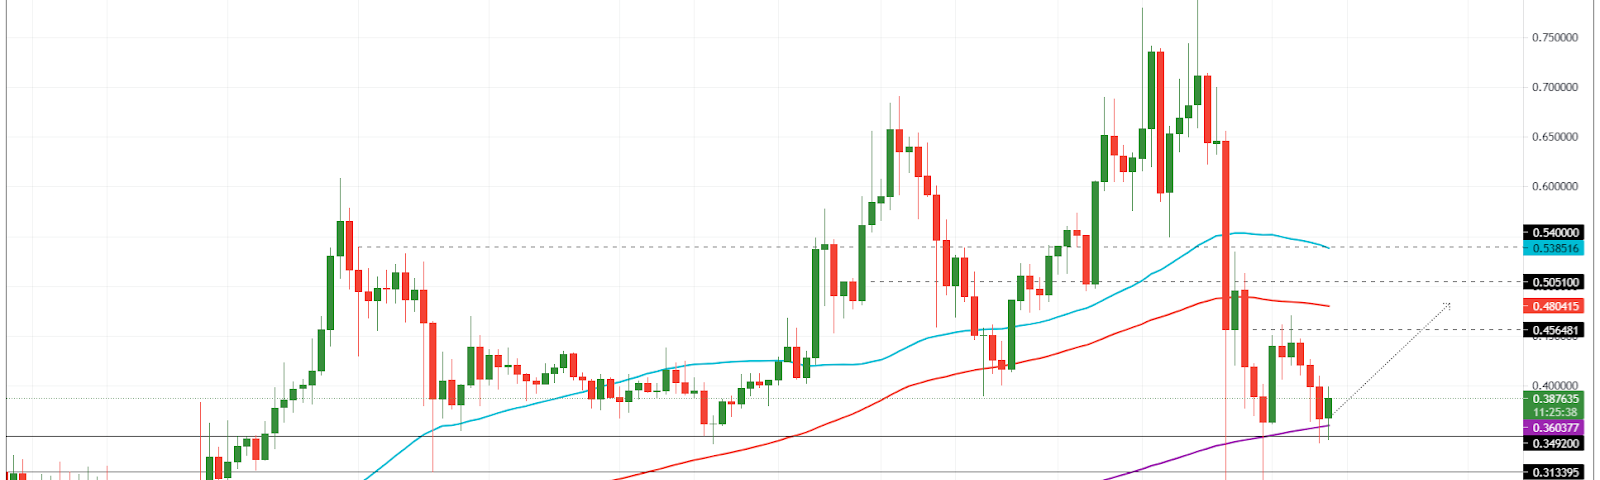 XLM/USD 1-day chart